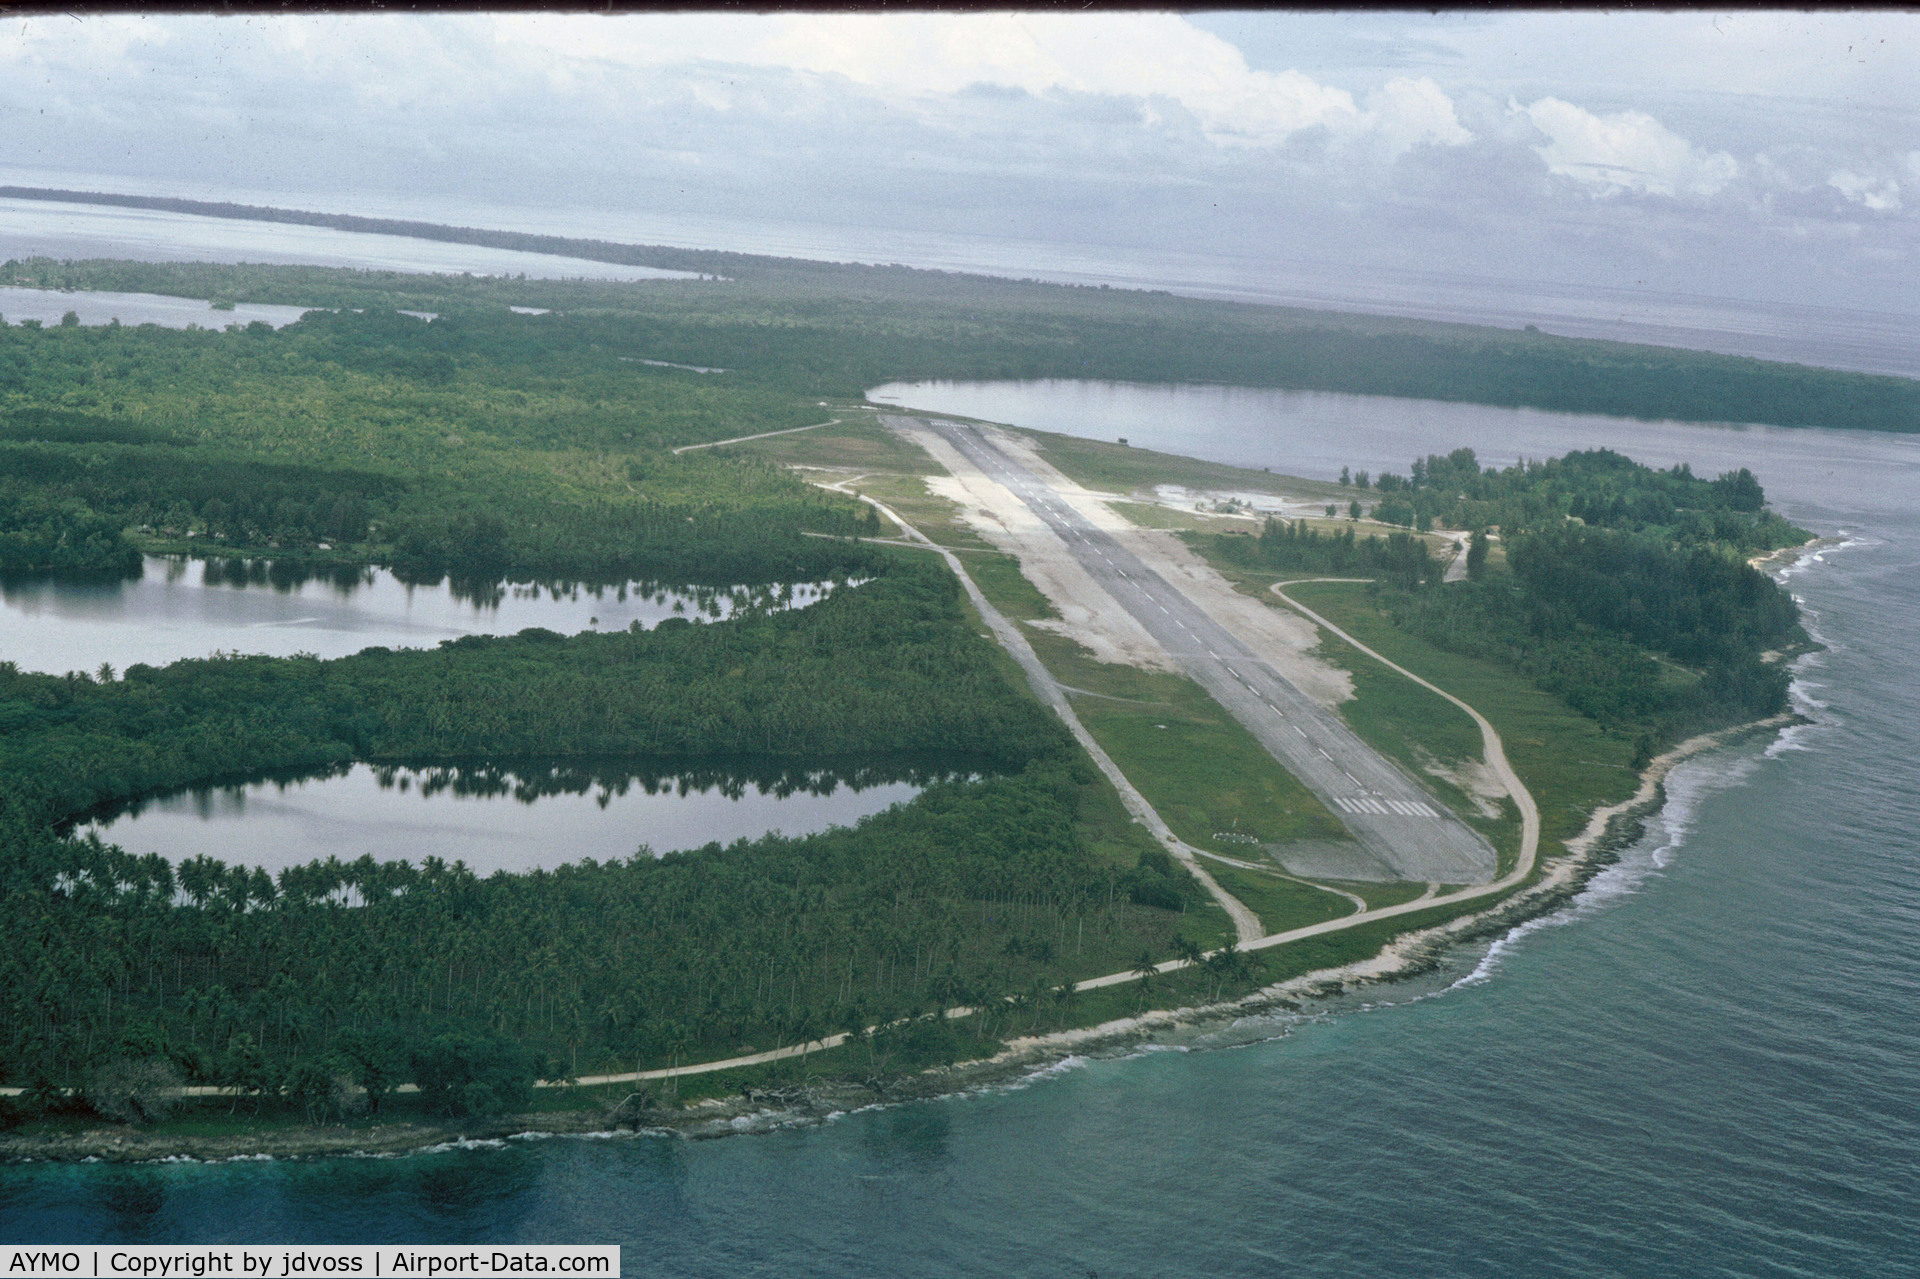 Momote Airport, Manus Island Papua New Guinea (AYMO) - Photographed from TAA DC-3. This field was a former USAAF B-24 base during WWII.